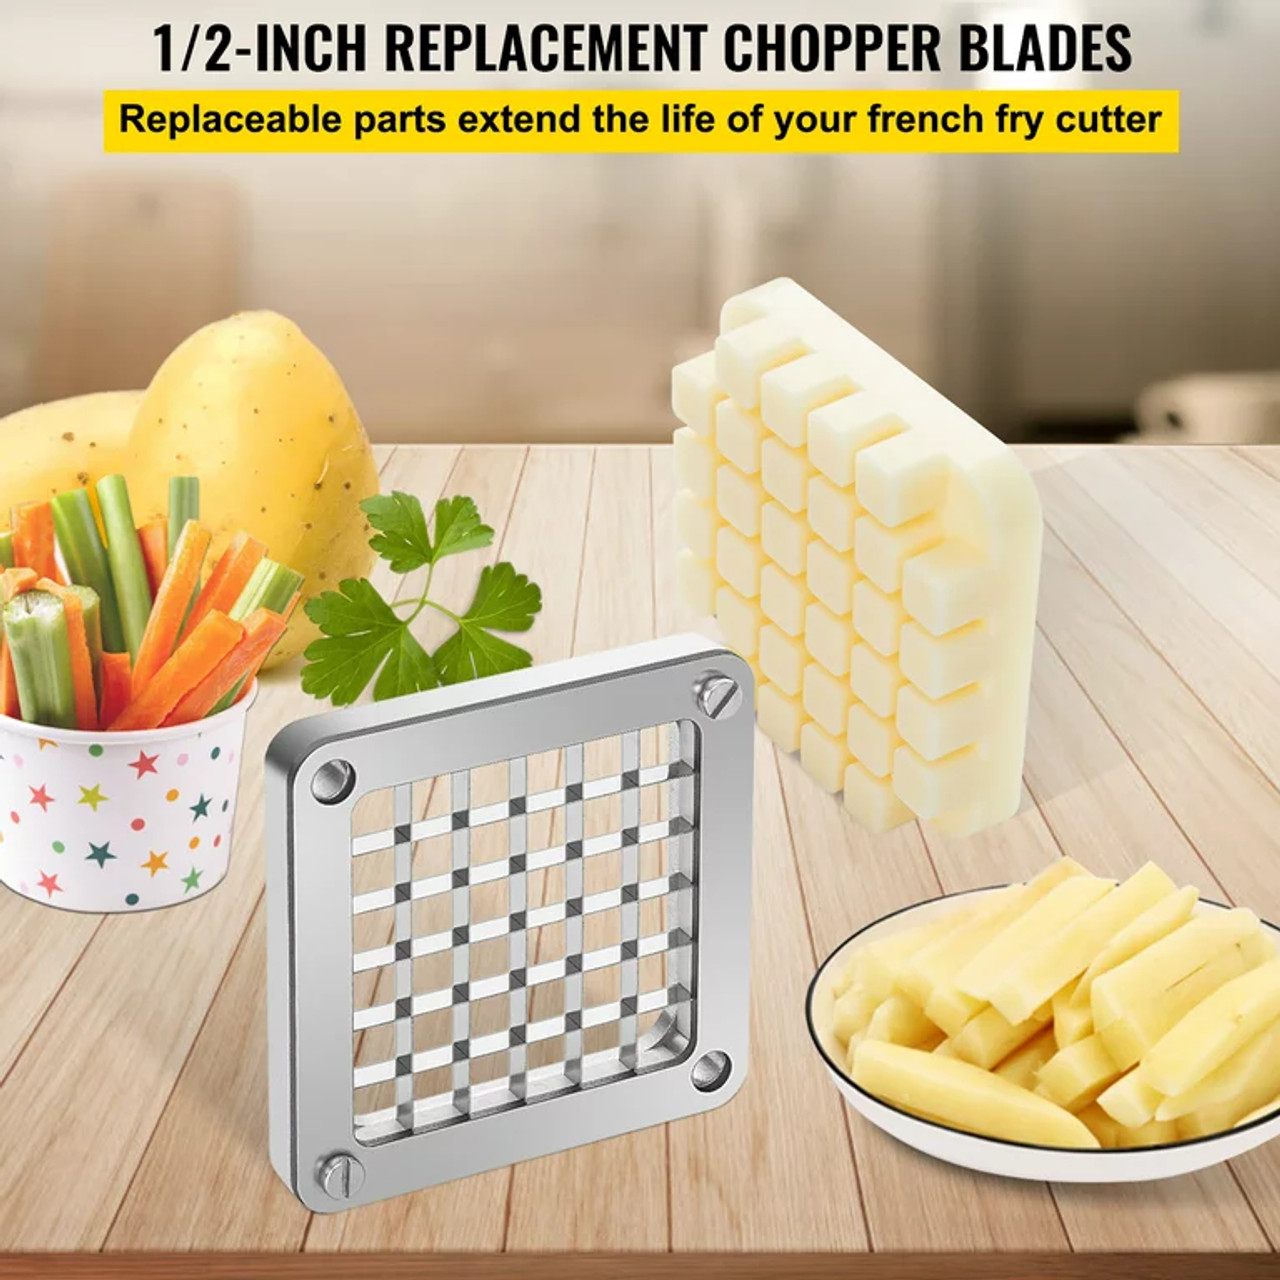 Replacement Chopper Blade, 1/2 inch, 3 PCS French Fry Blade Assembly with 6 Extra Knives, Stainless Steel Dicer Parts and Push Block for Cutting